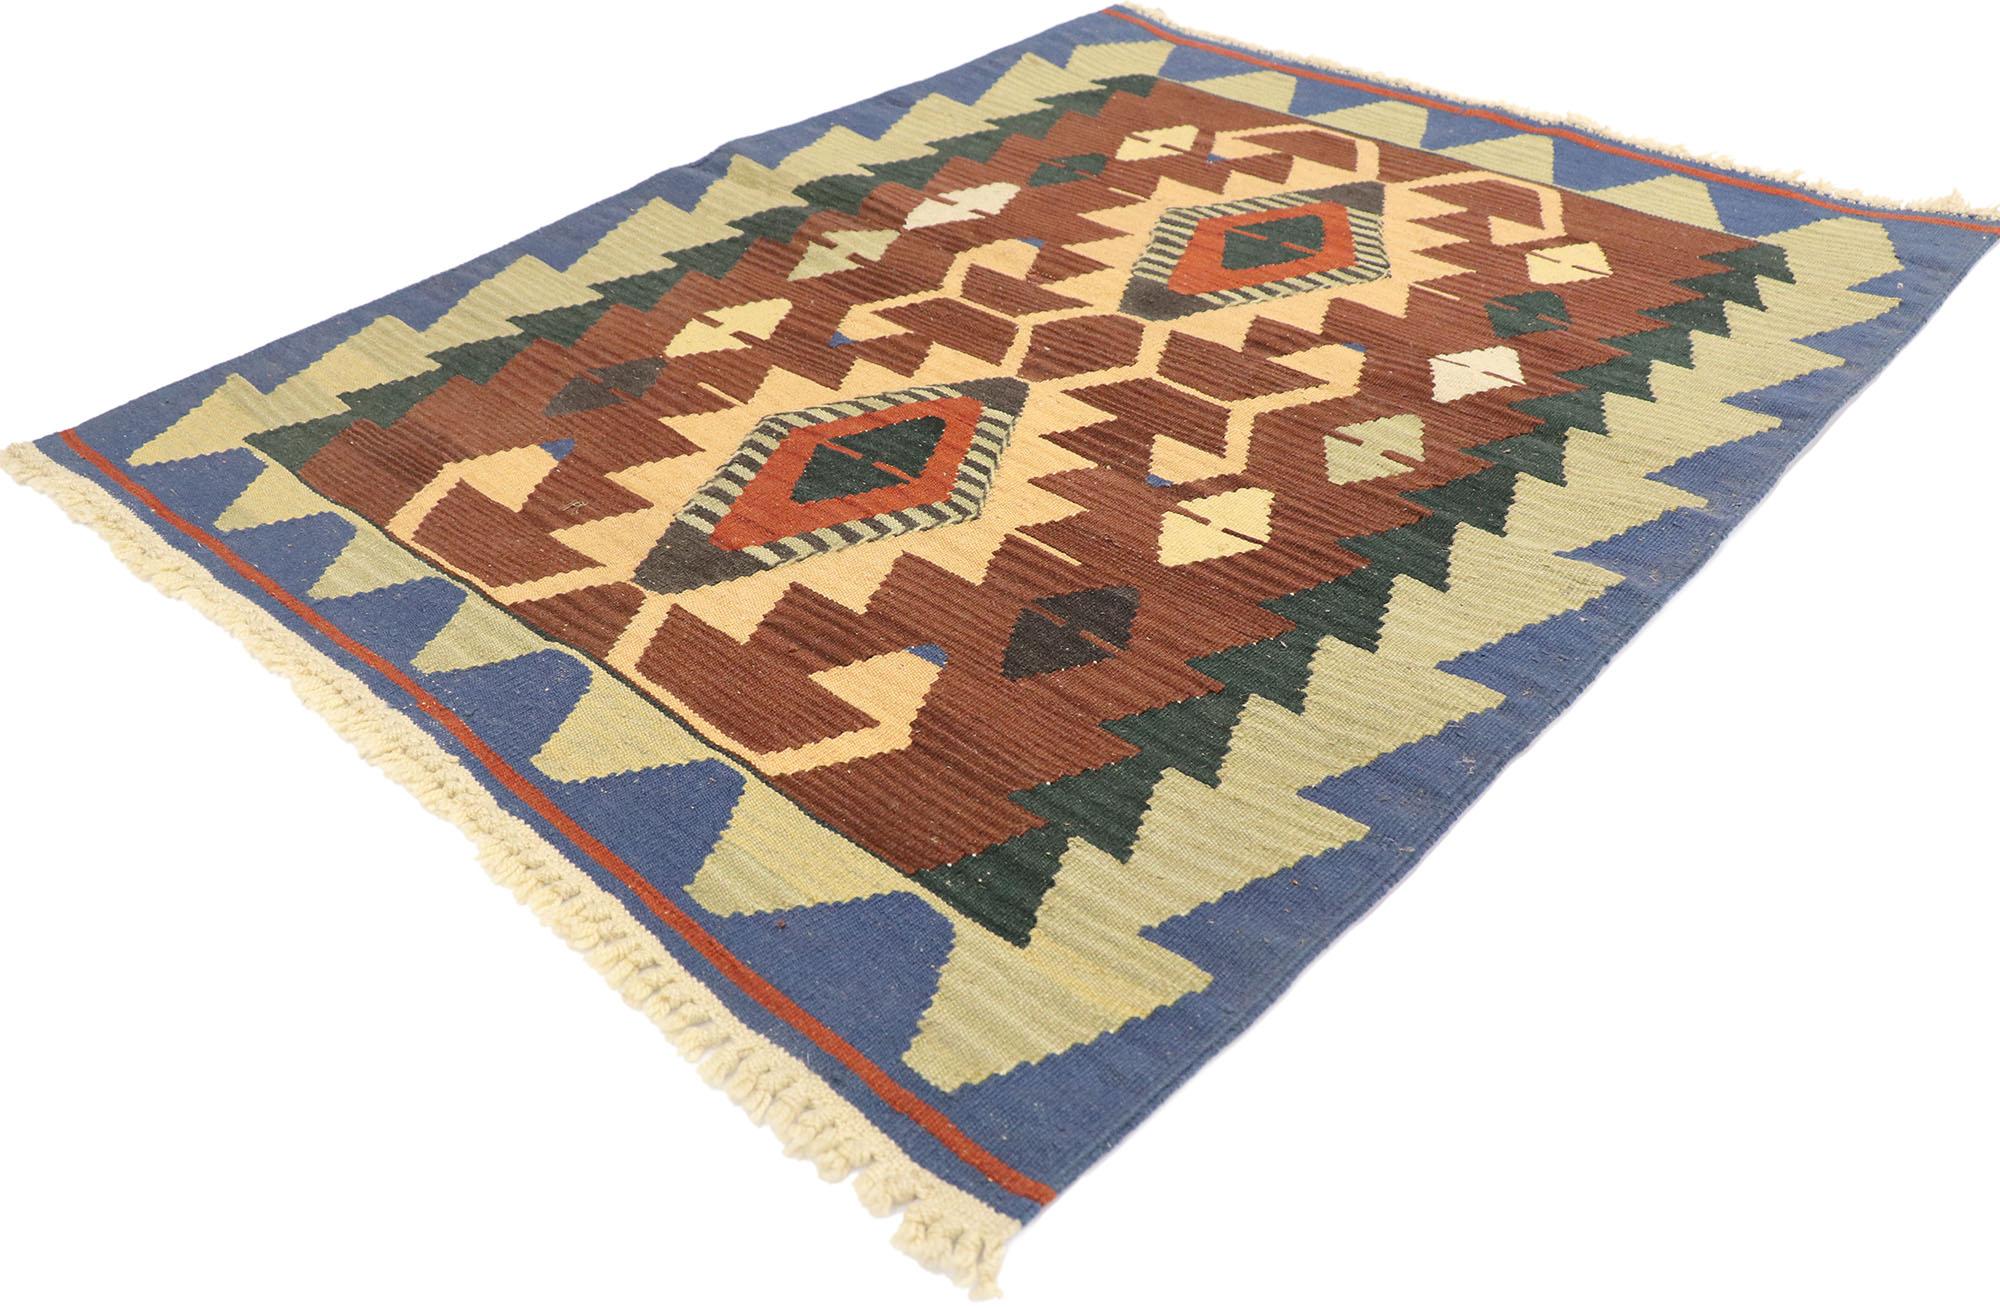 77979 Vintage Persian Shiraz Kilim rug with Tribal Style 03'02 x 03'11. Full of tiny details and a bold expressive design combined with an earthy colorway and tribal style, this hand-woven wool vintage Persian Shiraz kilim rug is a captivating